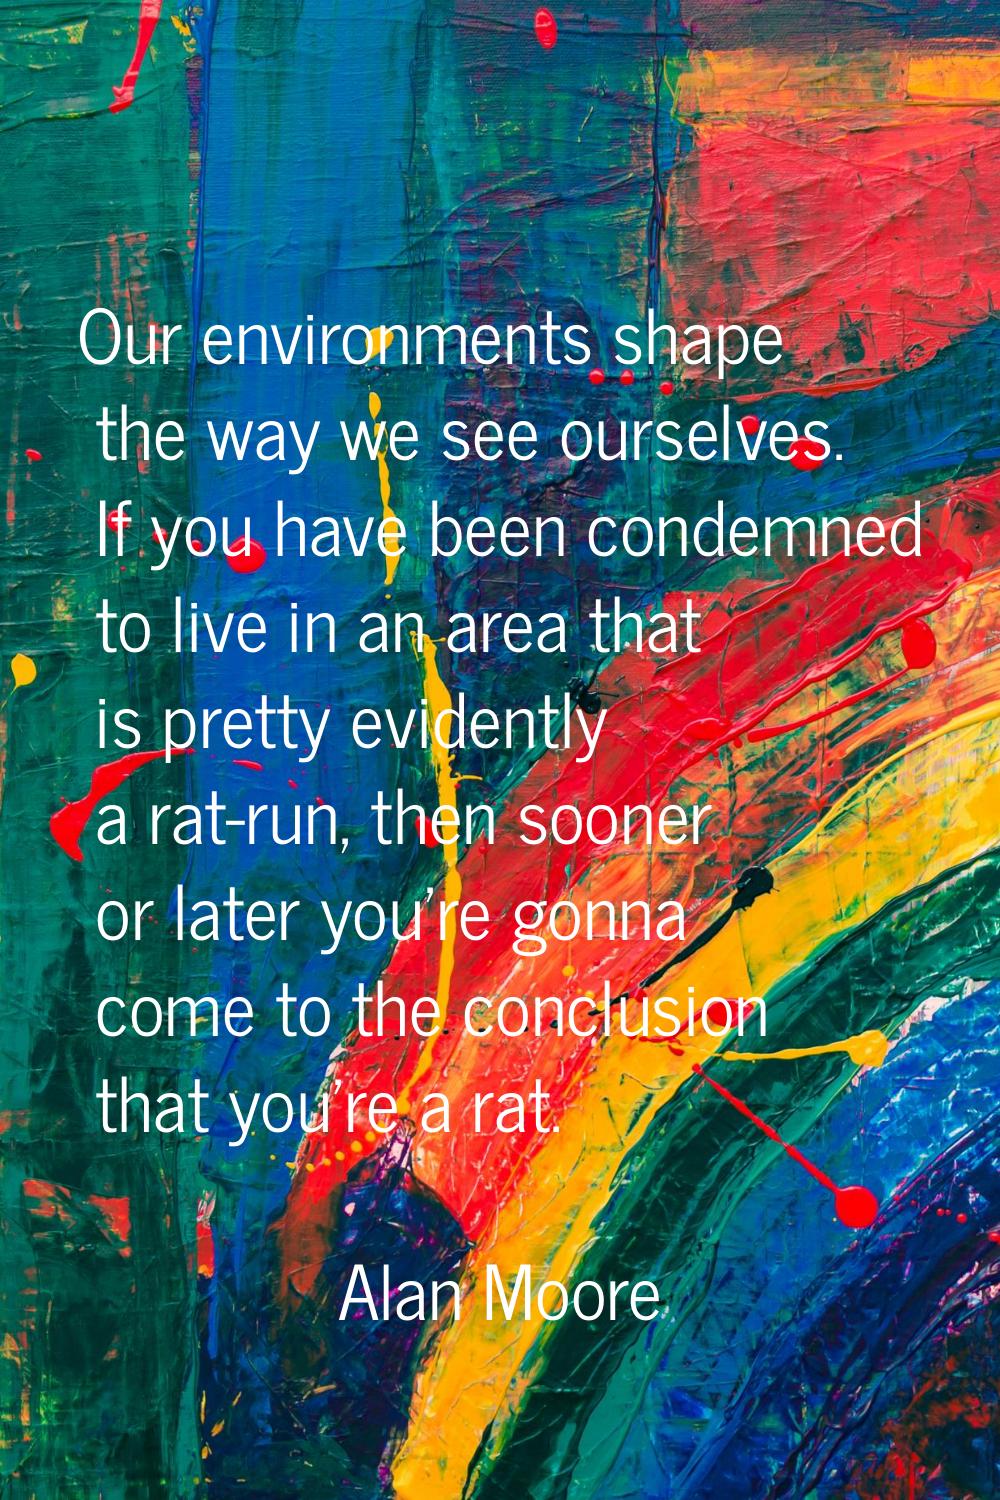 Our environments shape the way we see ourselves. If you have been condemned to live in an area that